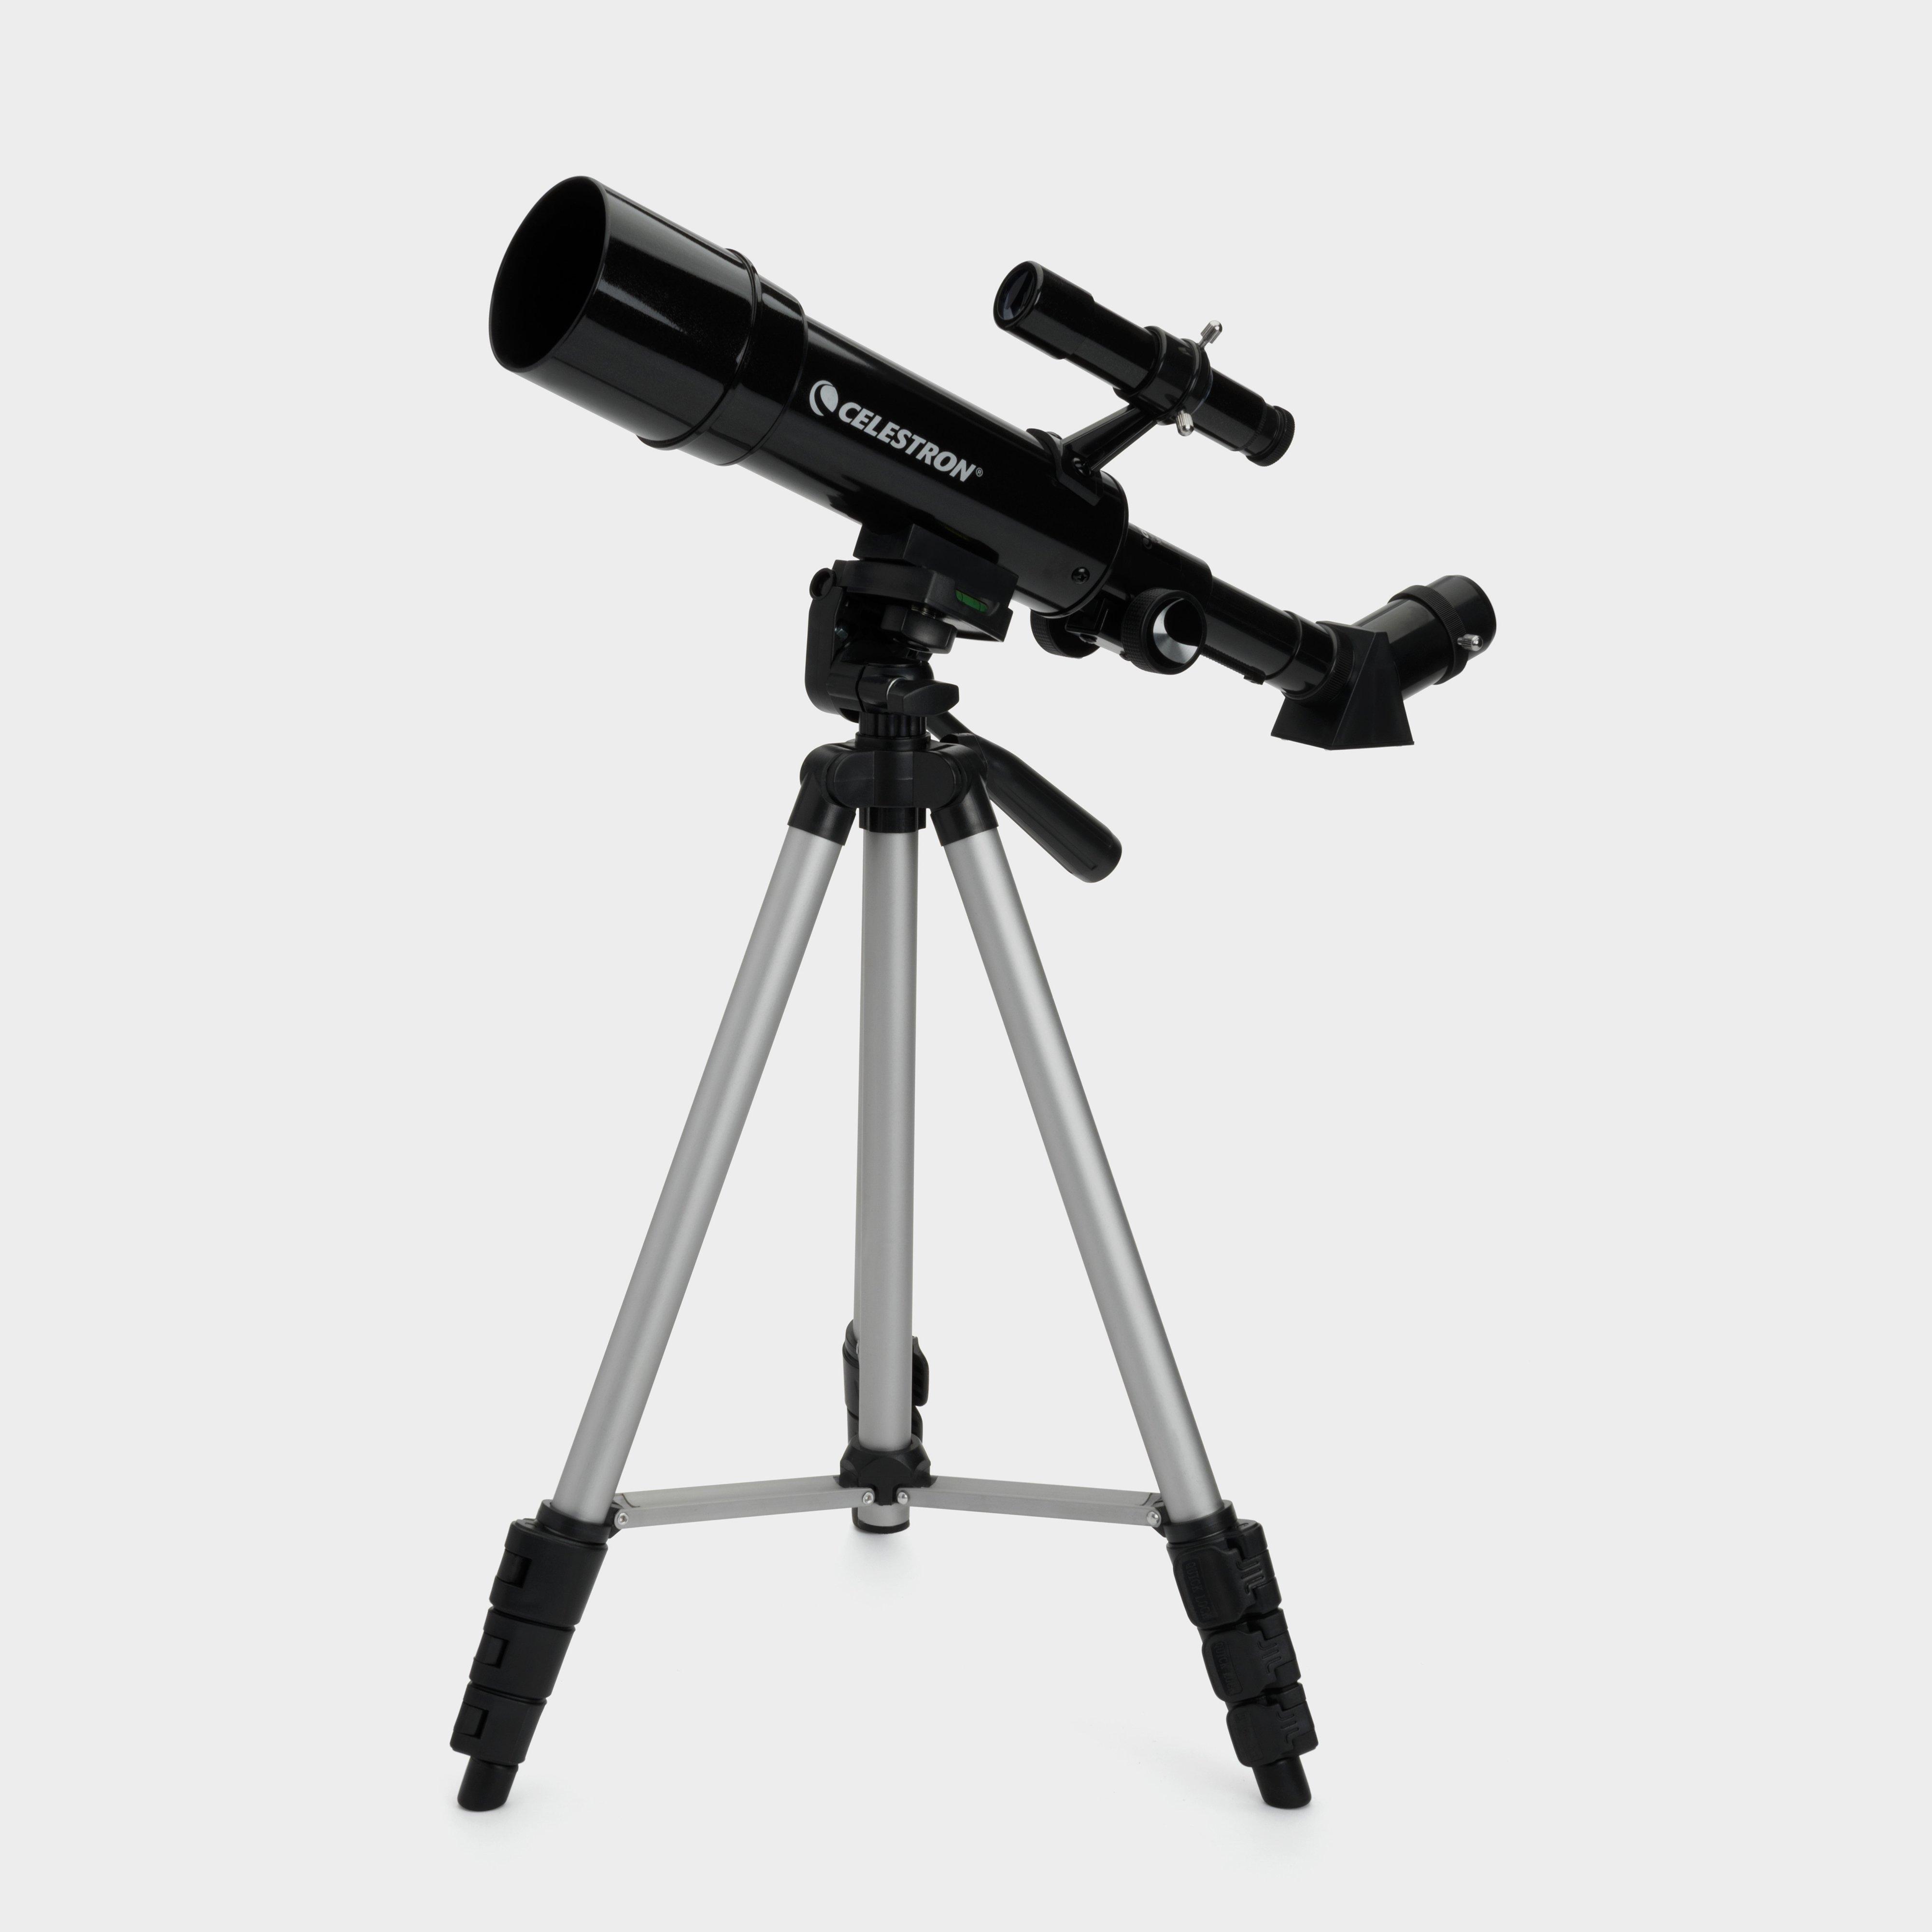 CELESTRON Travel Scope 50 with Backpack, Black